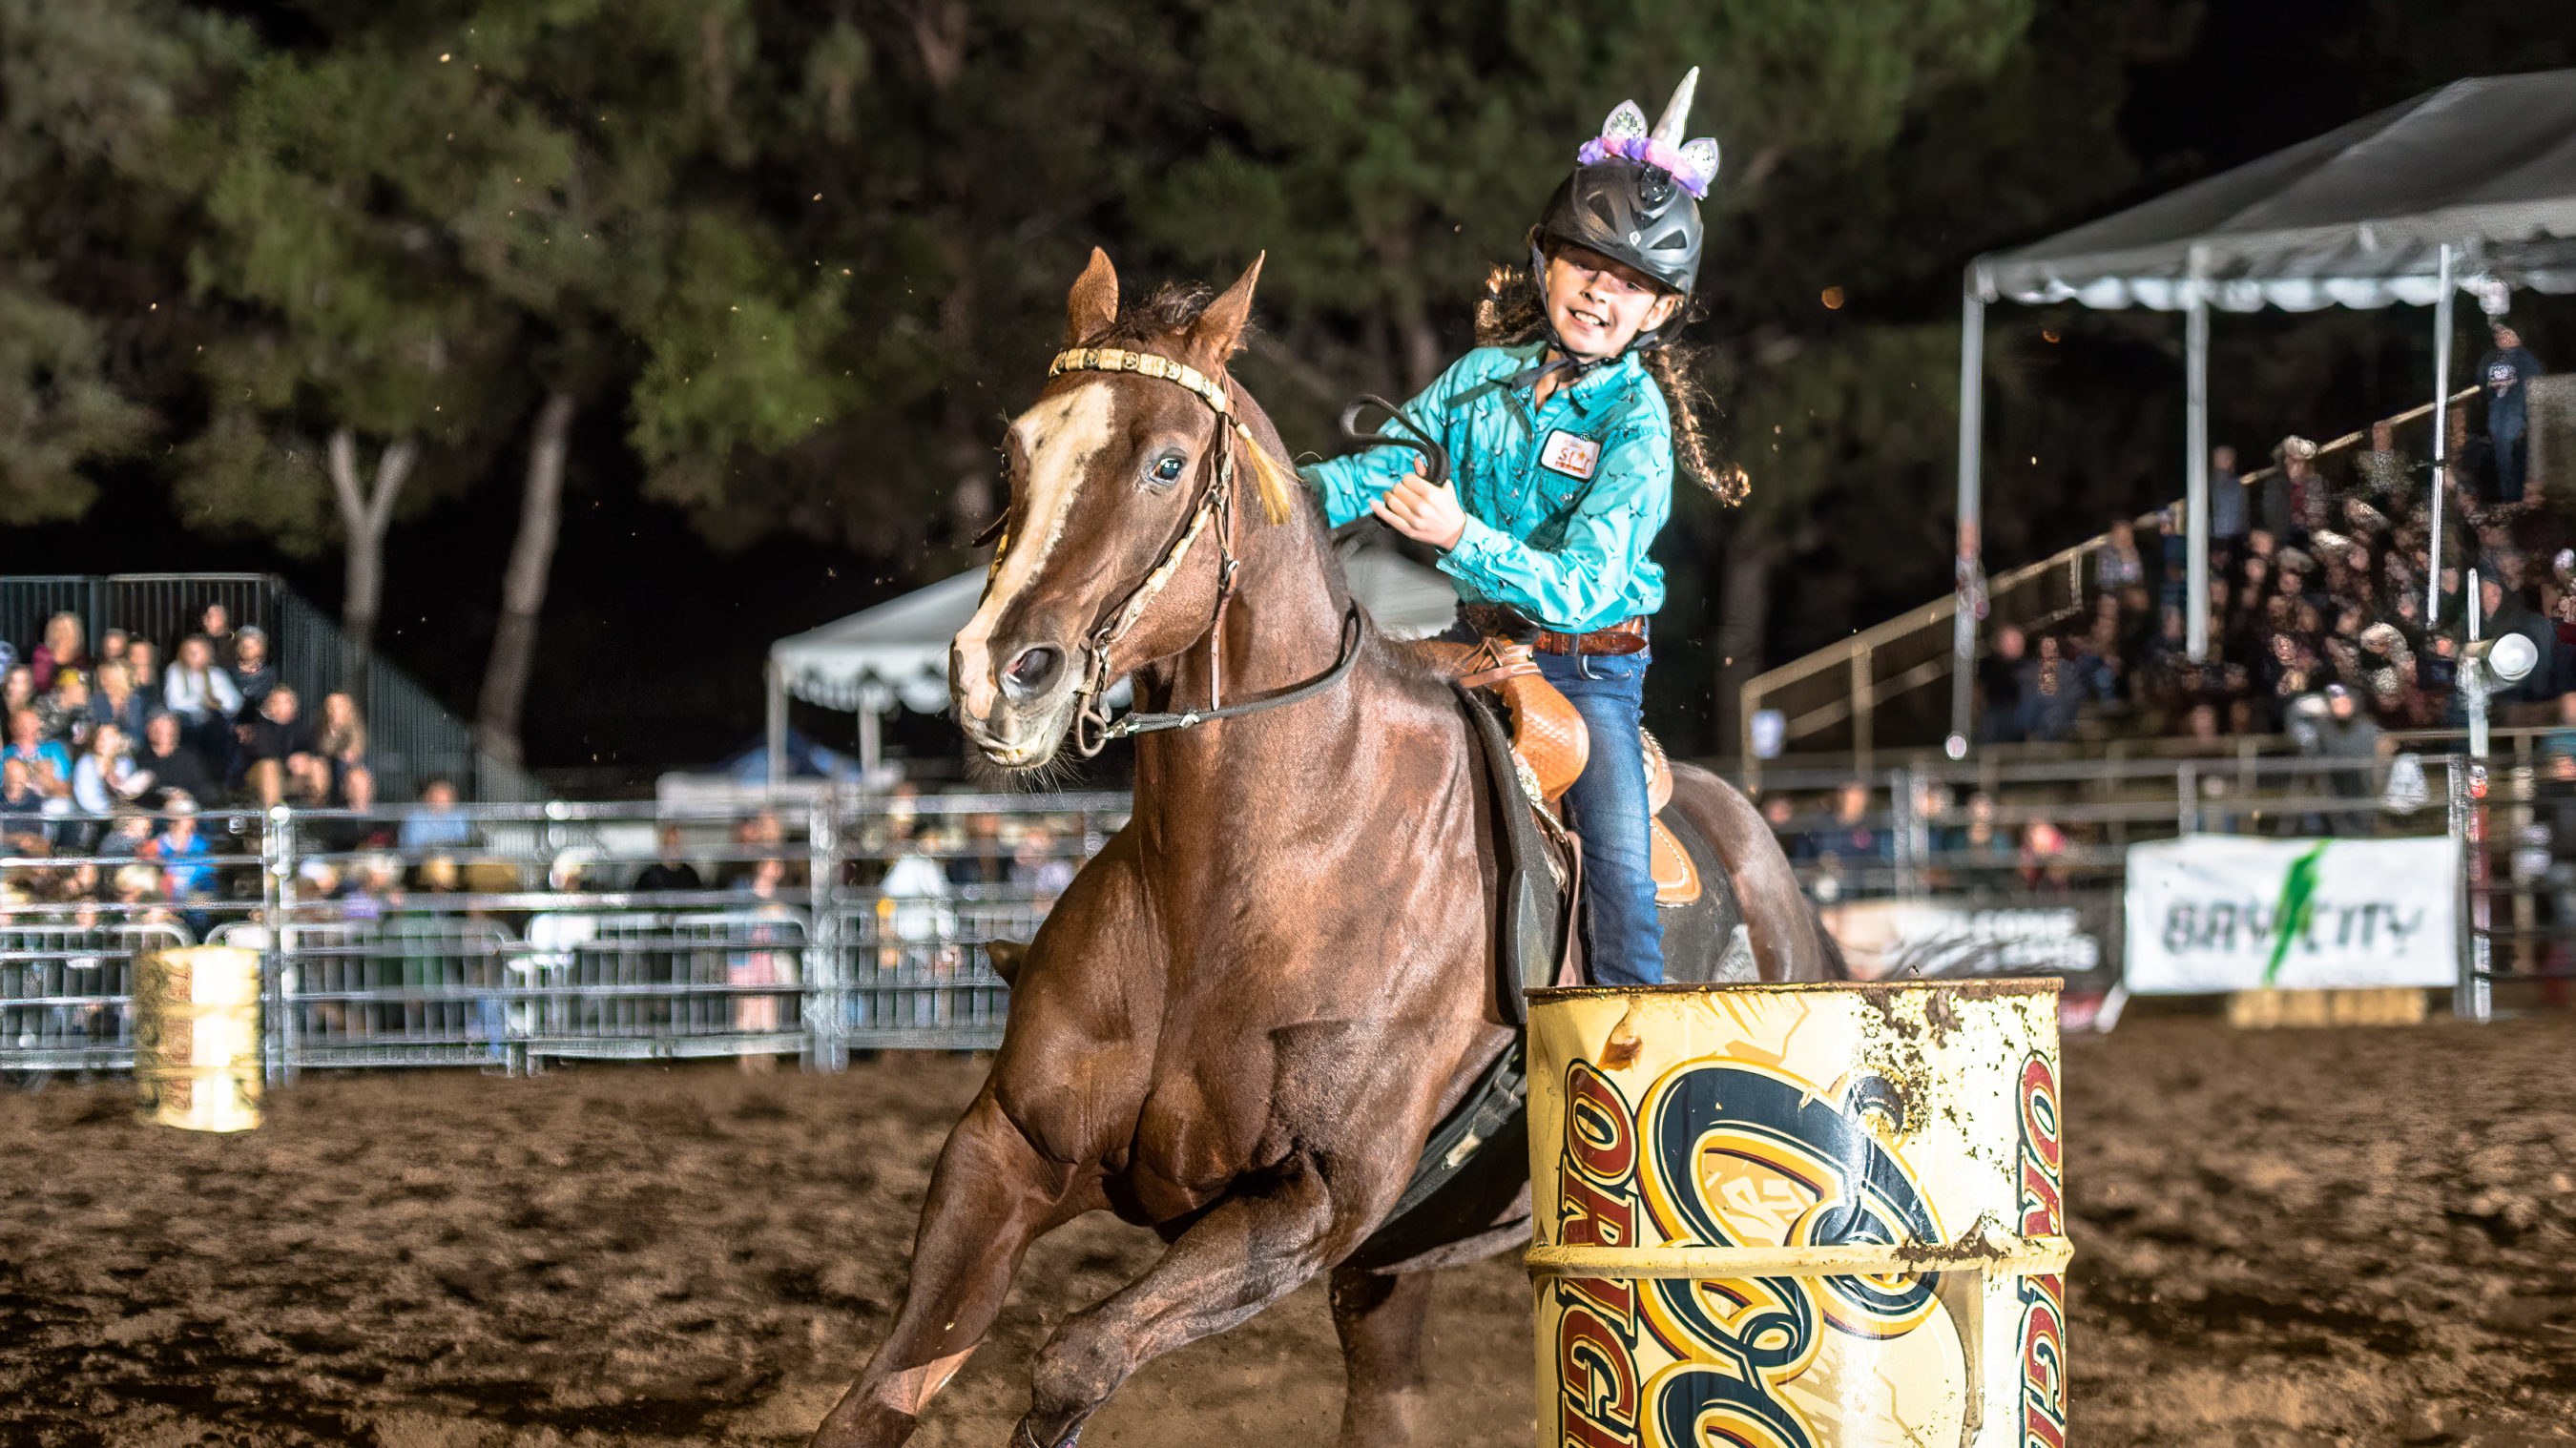 Annual Poway Rodeo returns to rodeo grounds on Tierra Bonita Road BVM